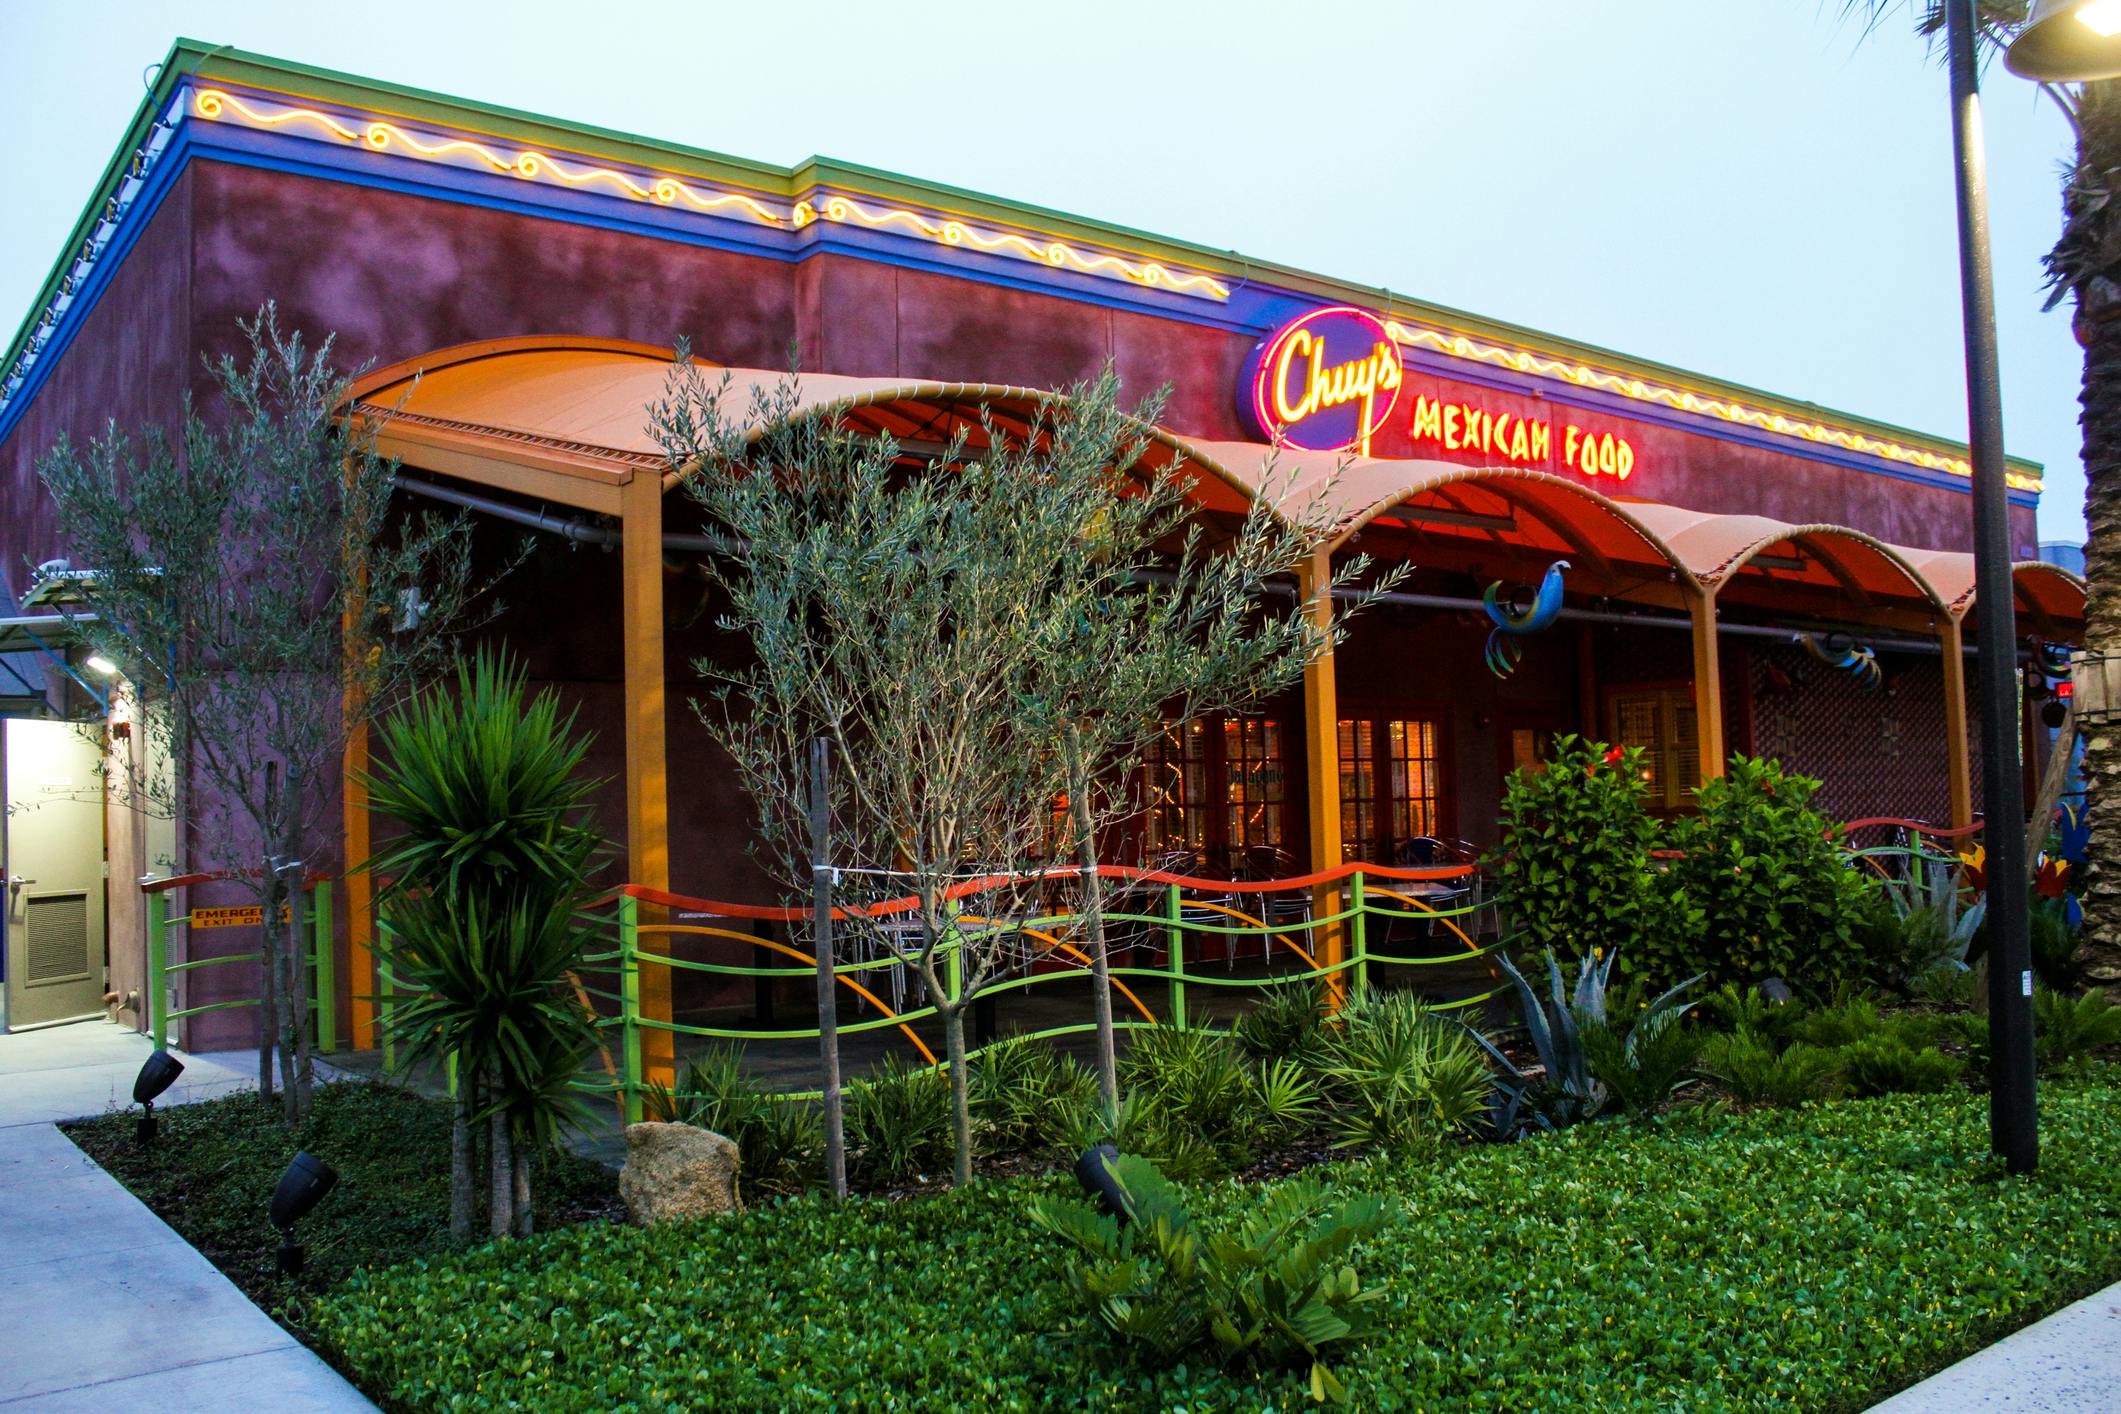 The exterior of a Chuy's Mexican Food restaurant.